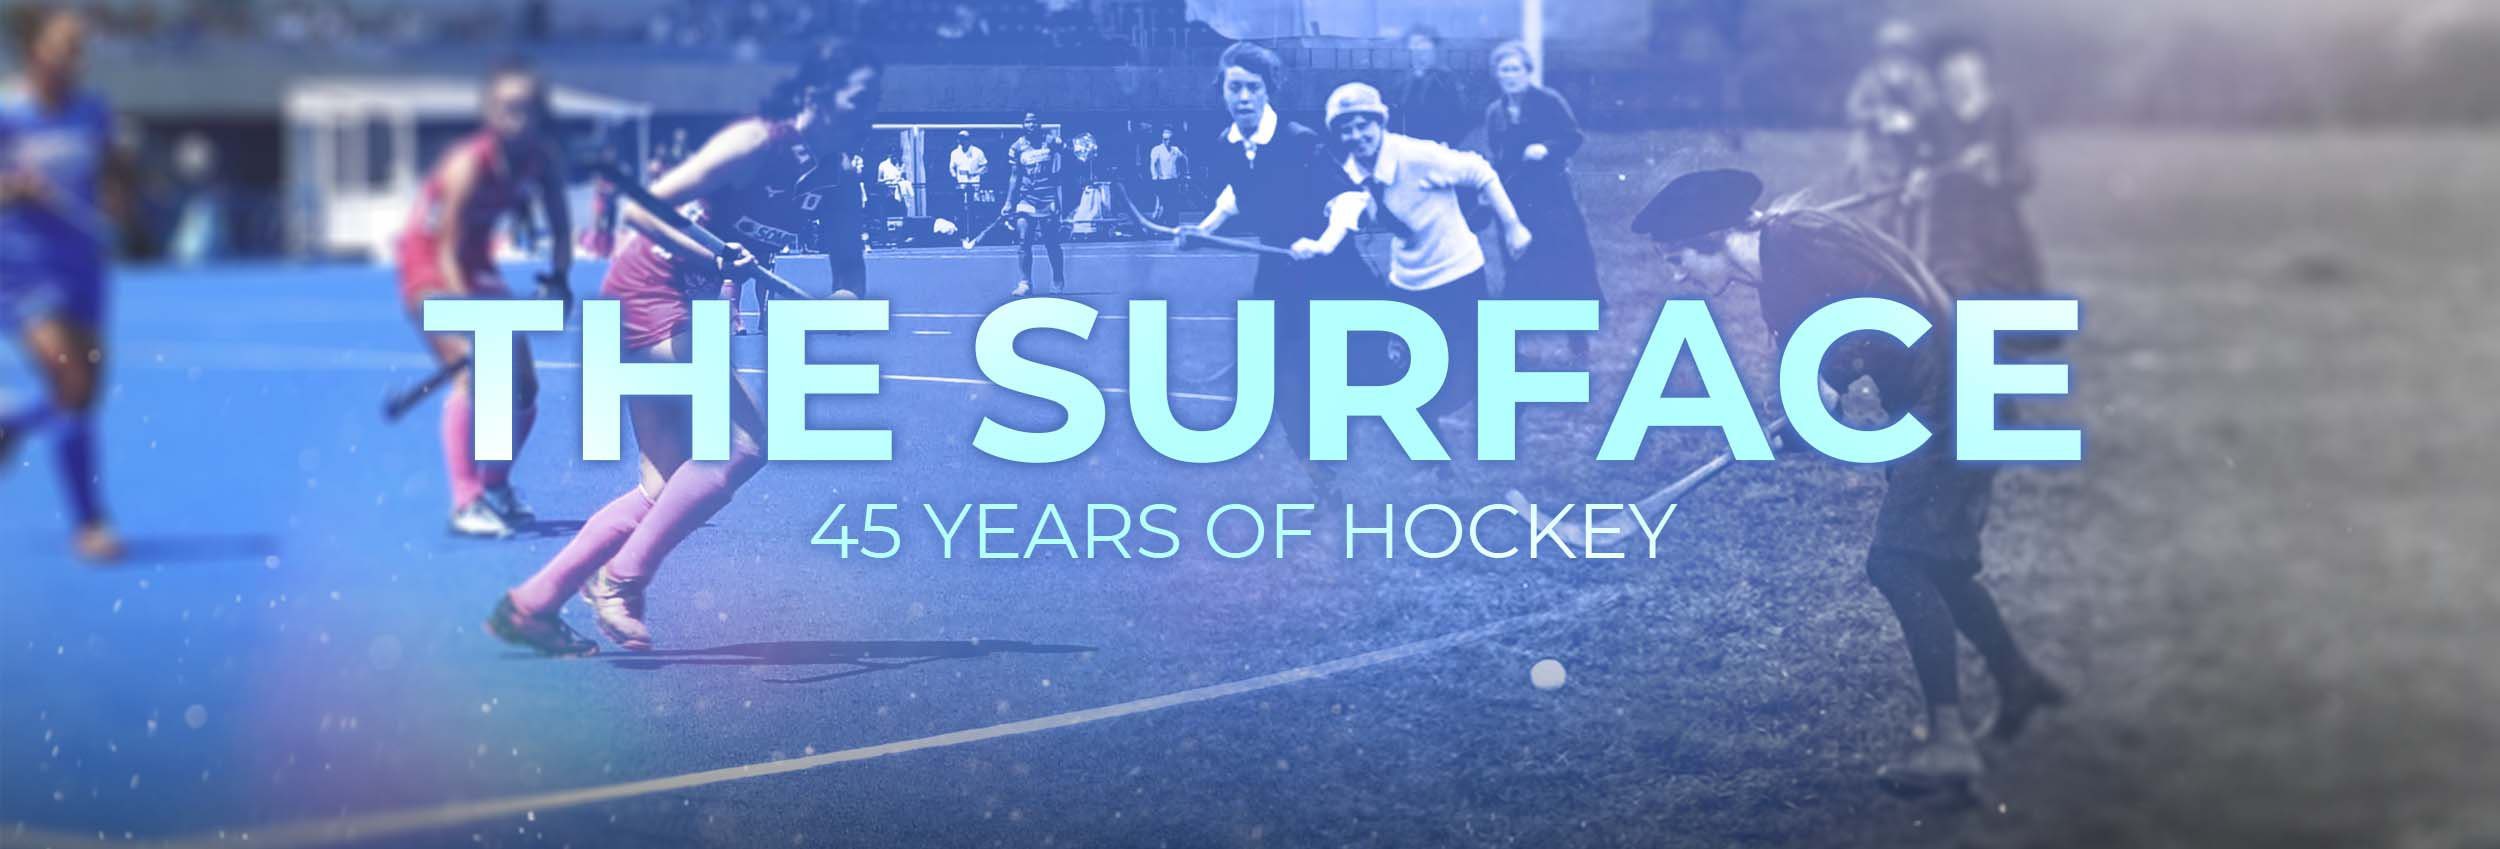 The Surface – 45 Years of Hockey